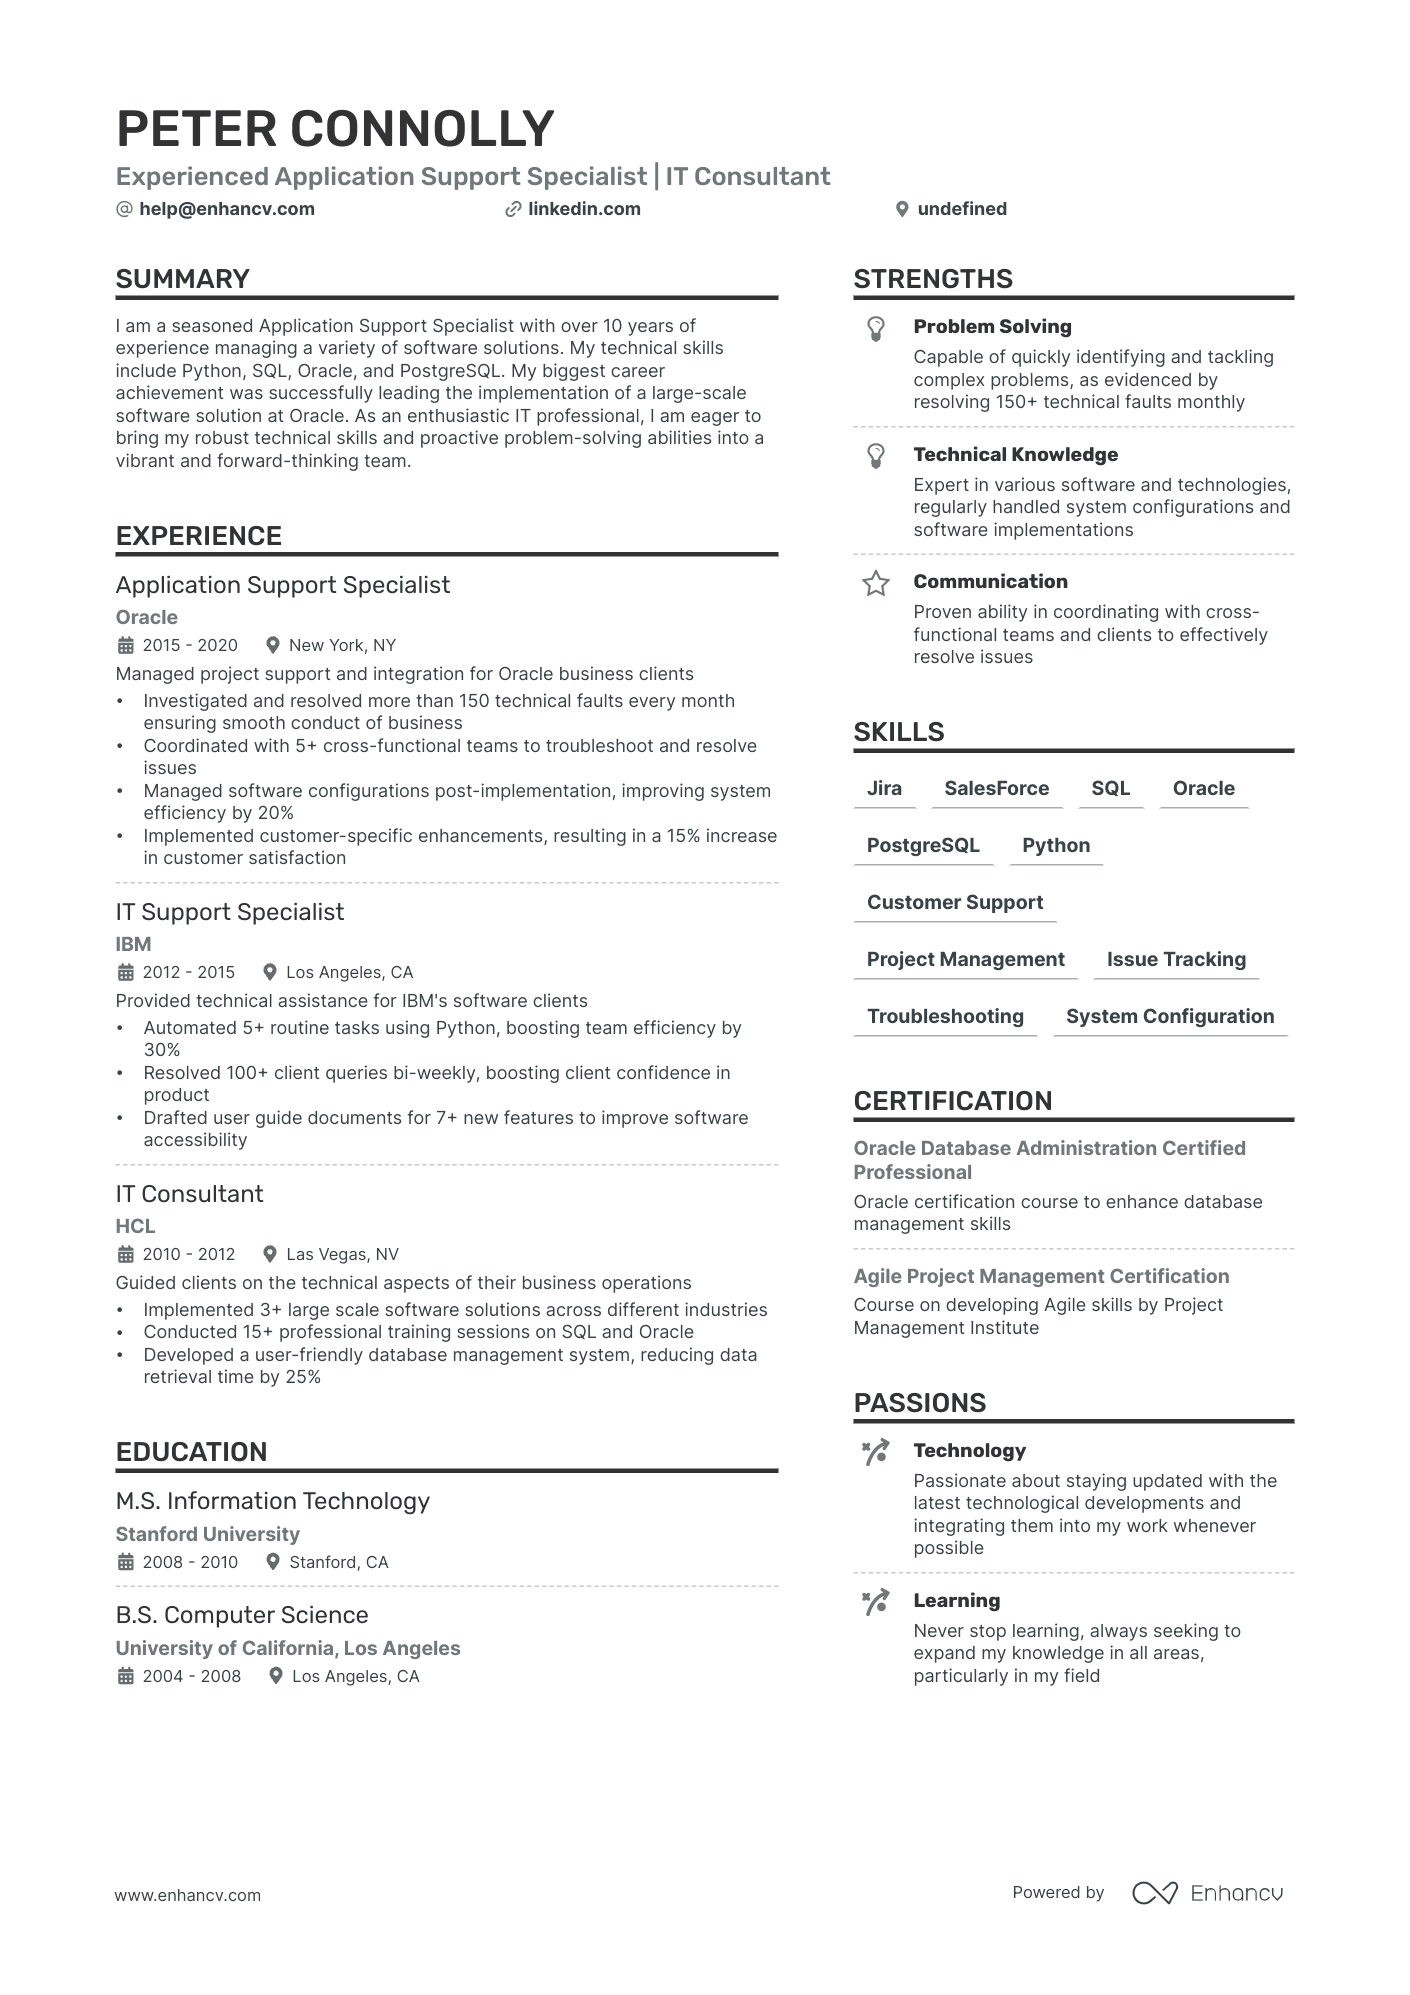 Application Support Specialist resume example